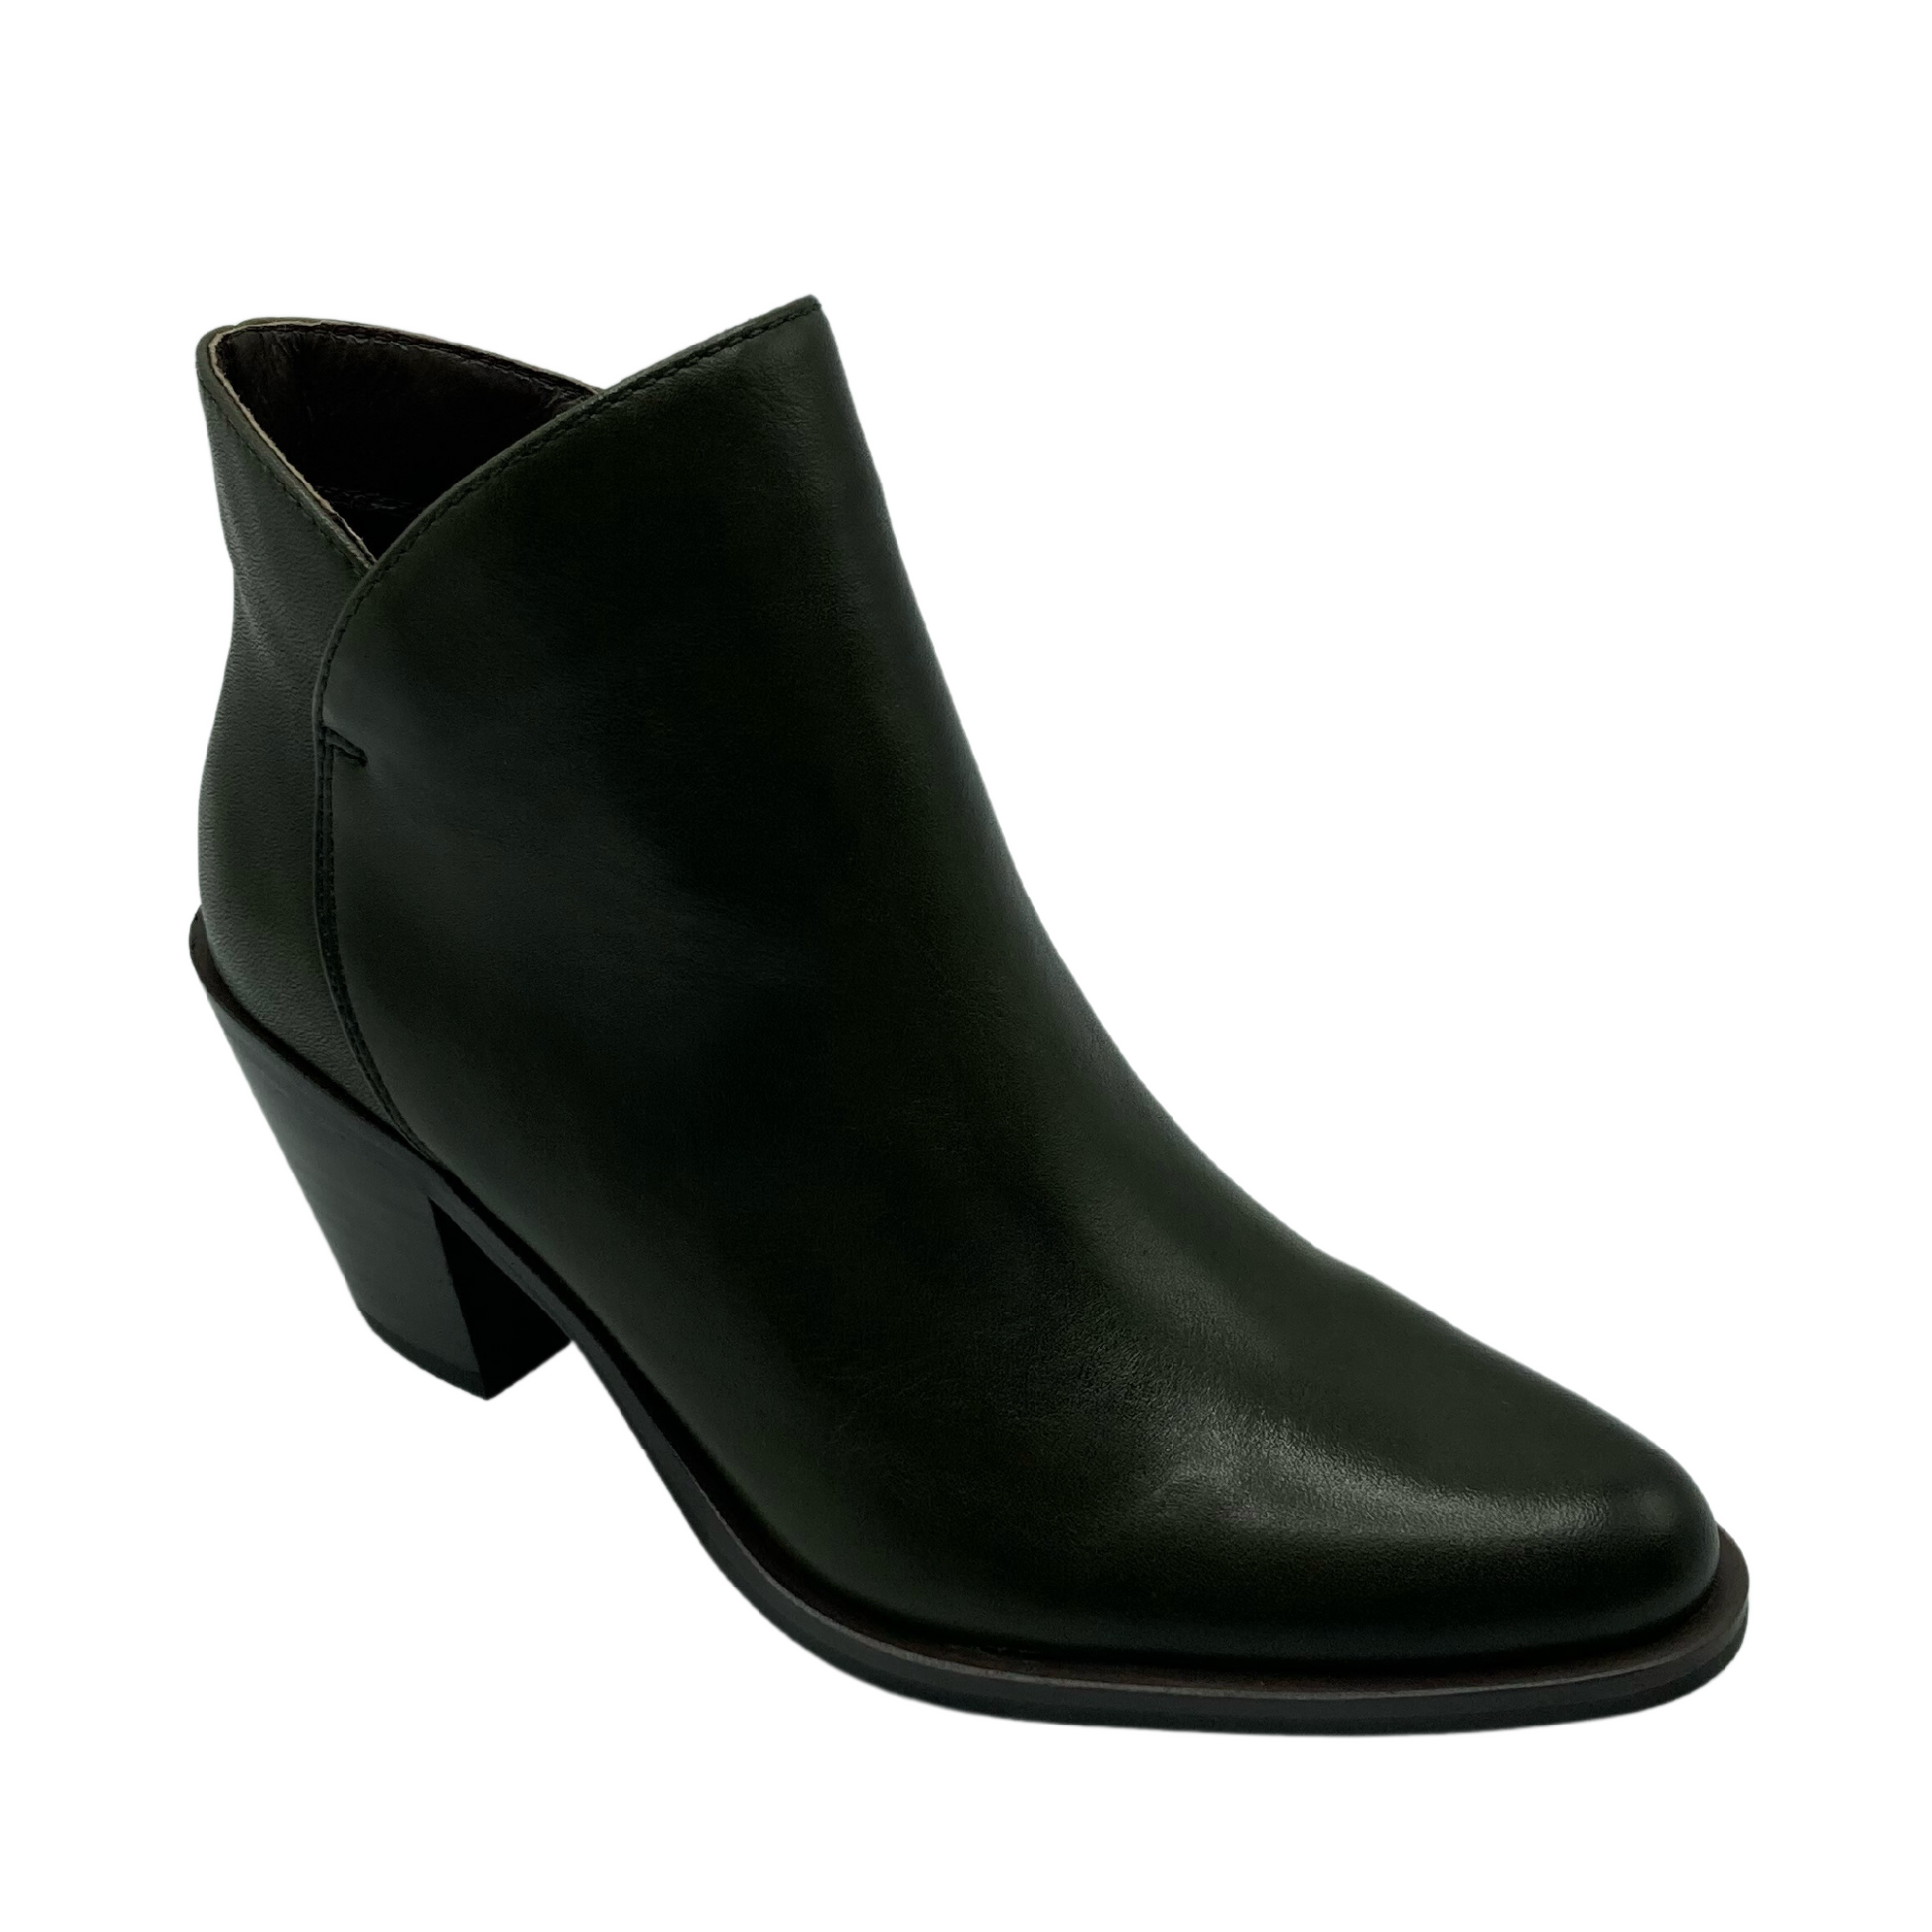 45 degree angled view of dark green leather ankle boot with pointed toe